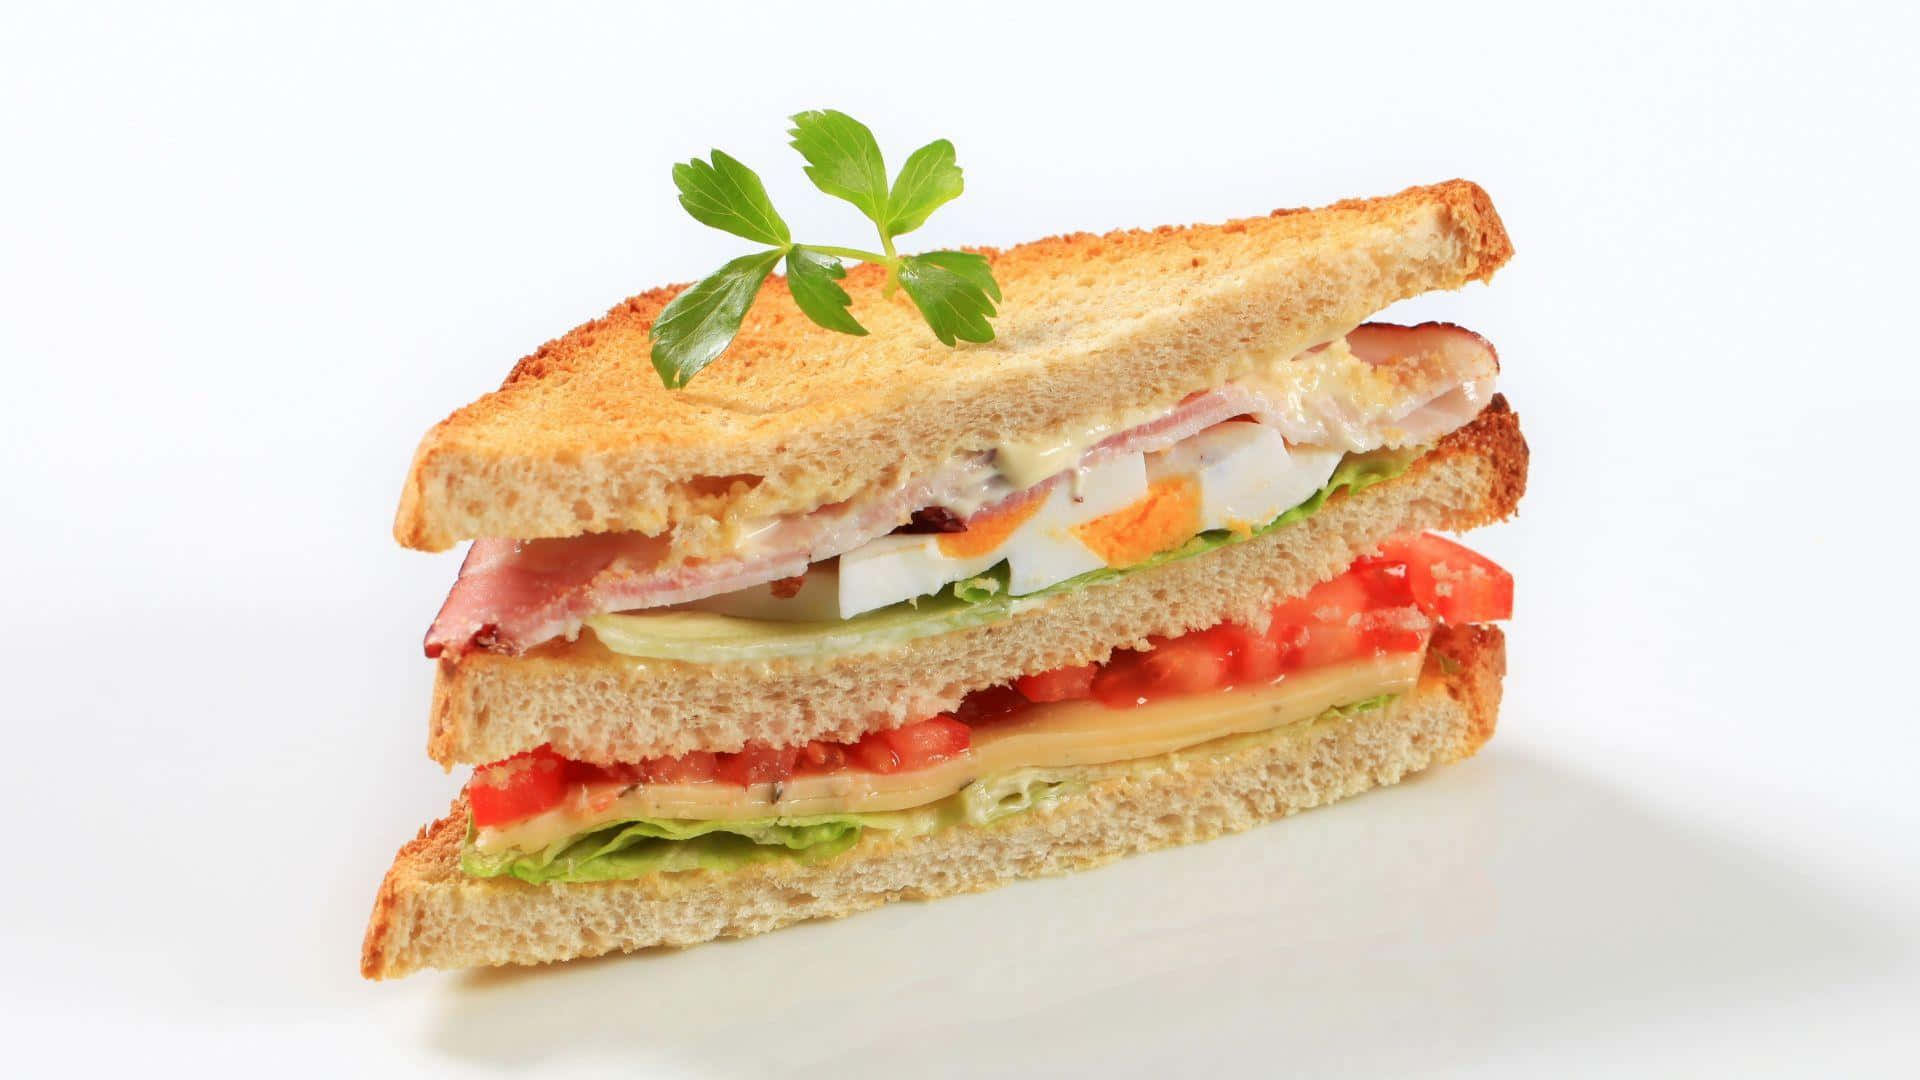 A Sandwich With Tomatoes And Lettuce